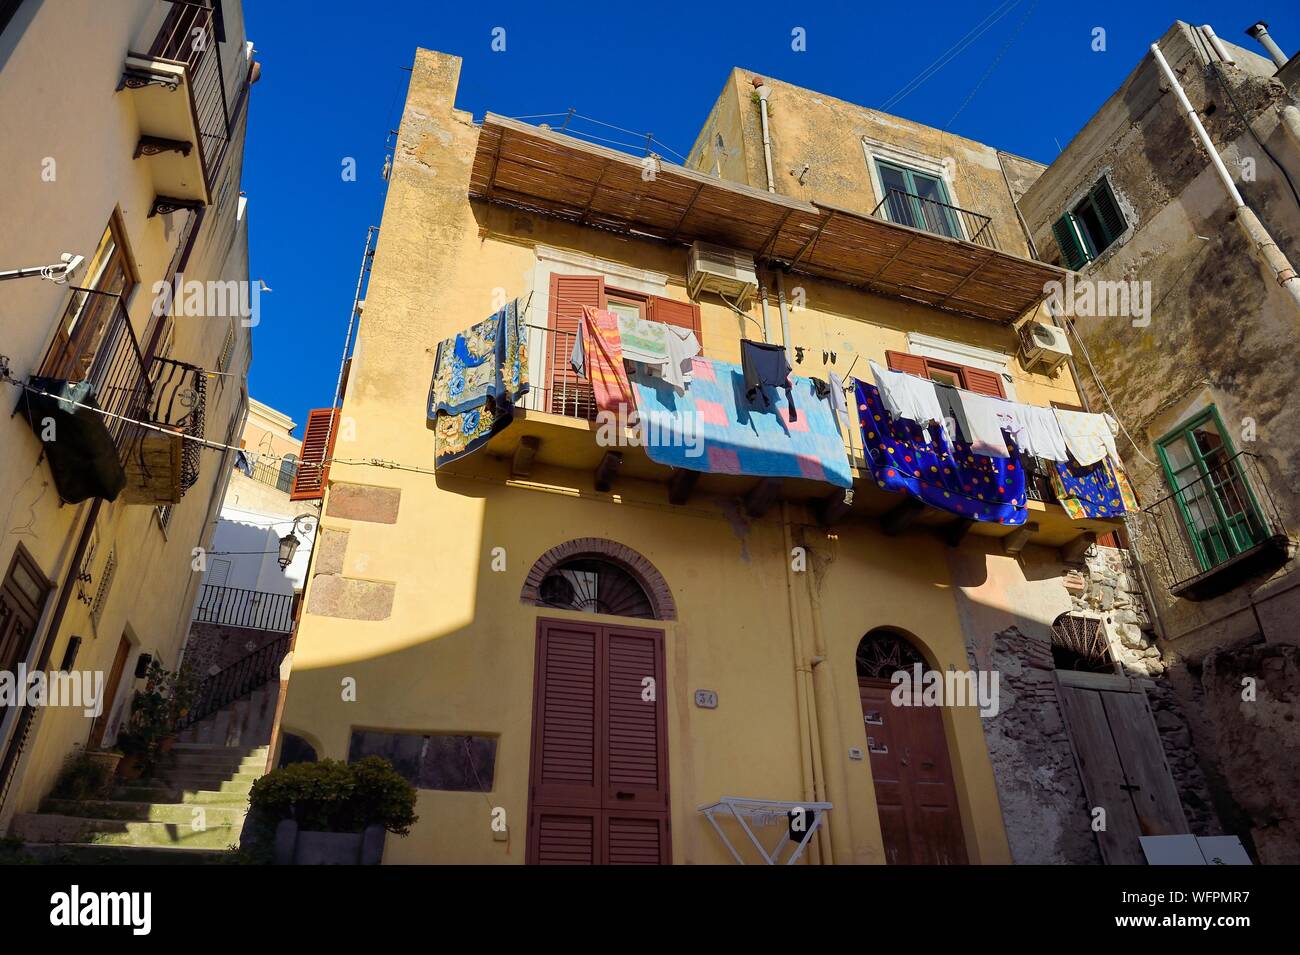 Italy, Sicily, Aeolian Islands, listed as World Heritage by UNESCO, Lipari Island, Lipari, laundry drying on the balcony of a house in the old town Stock Photo